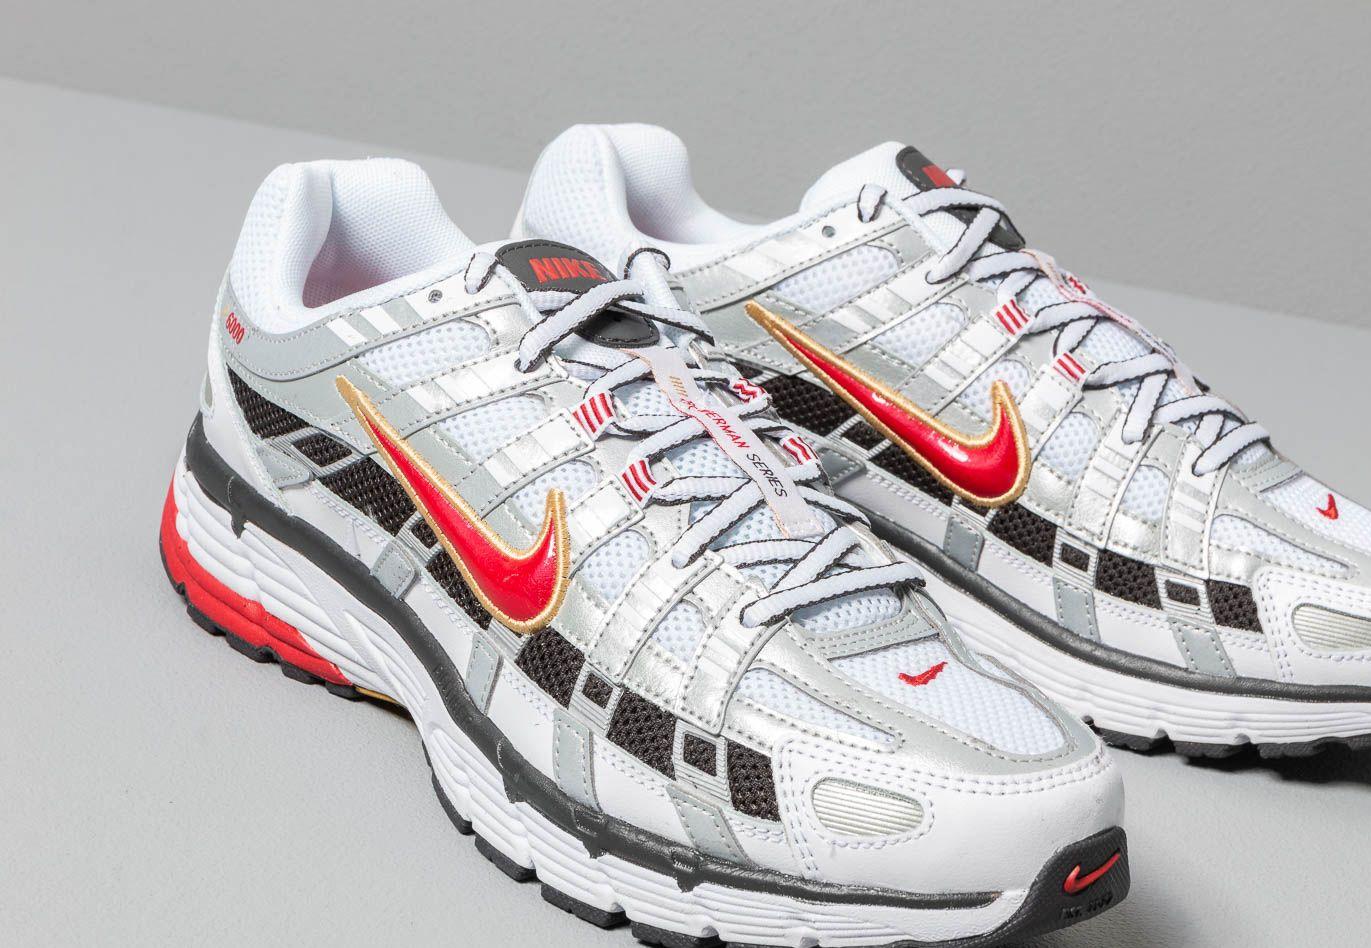 Nike Rubber P-6000 W White/ Varsity Red - Lyst